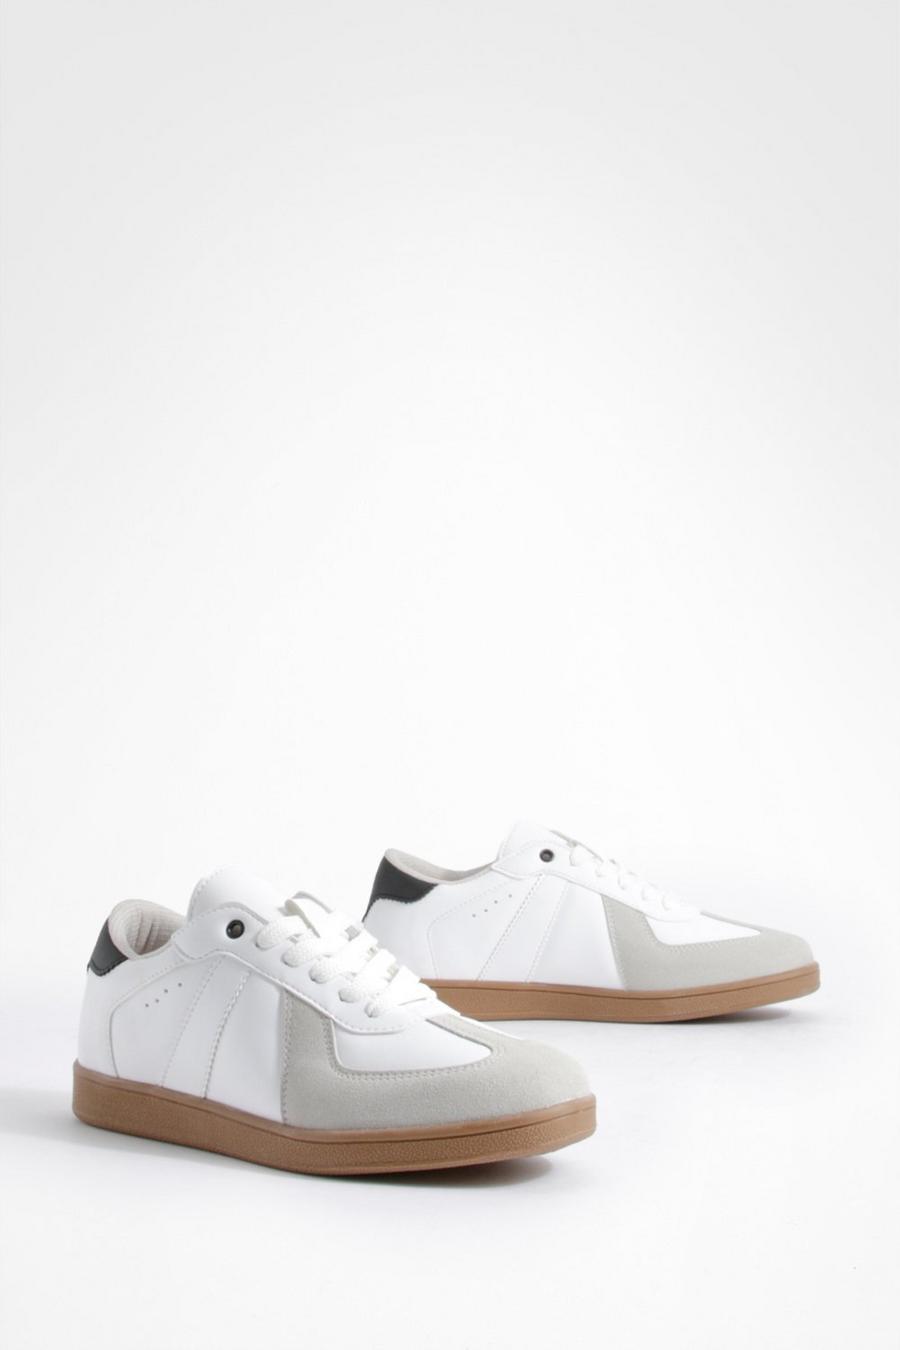 White Contrast Panel Gum Sole Flat Trainers 